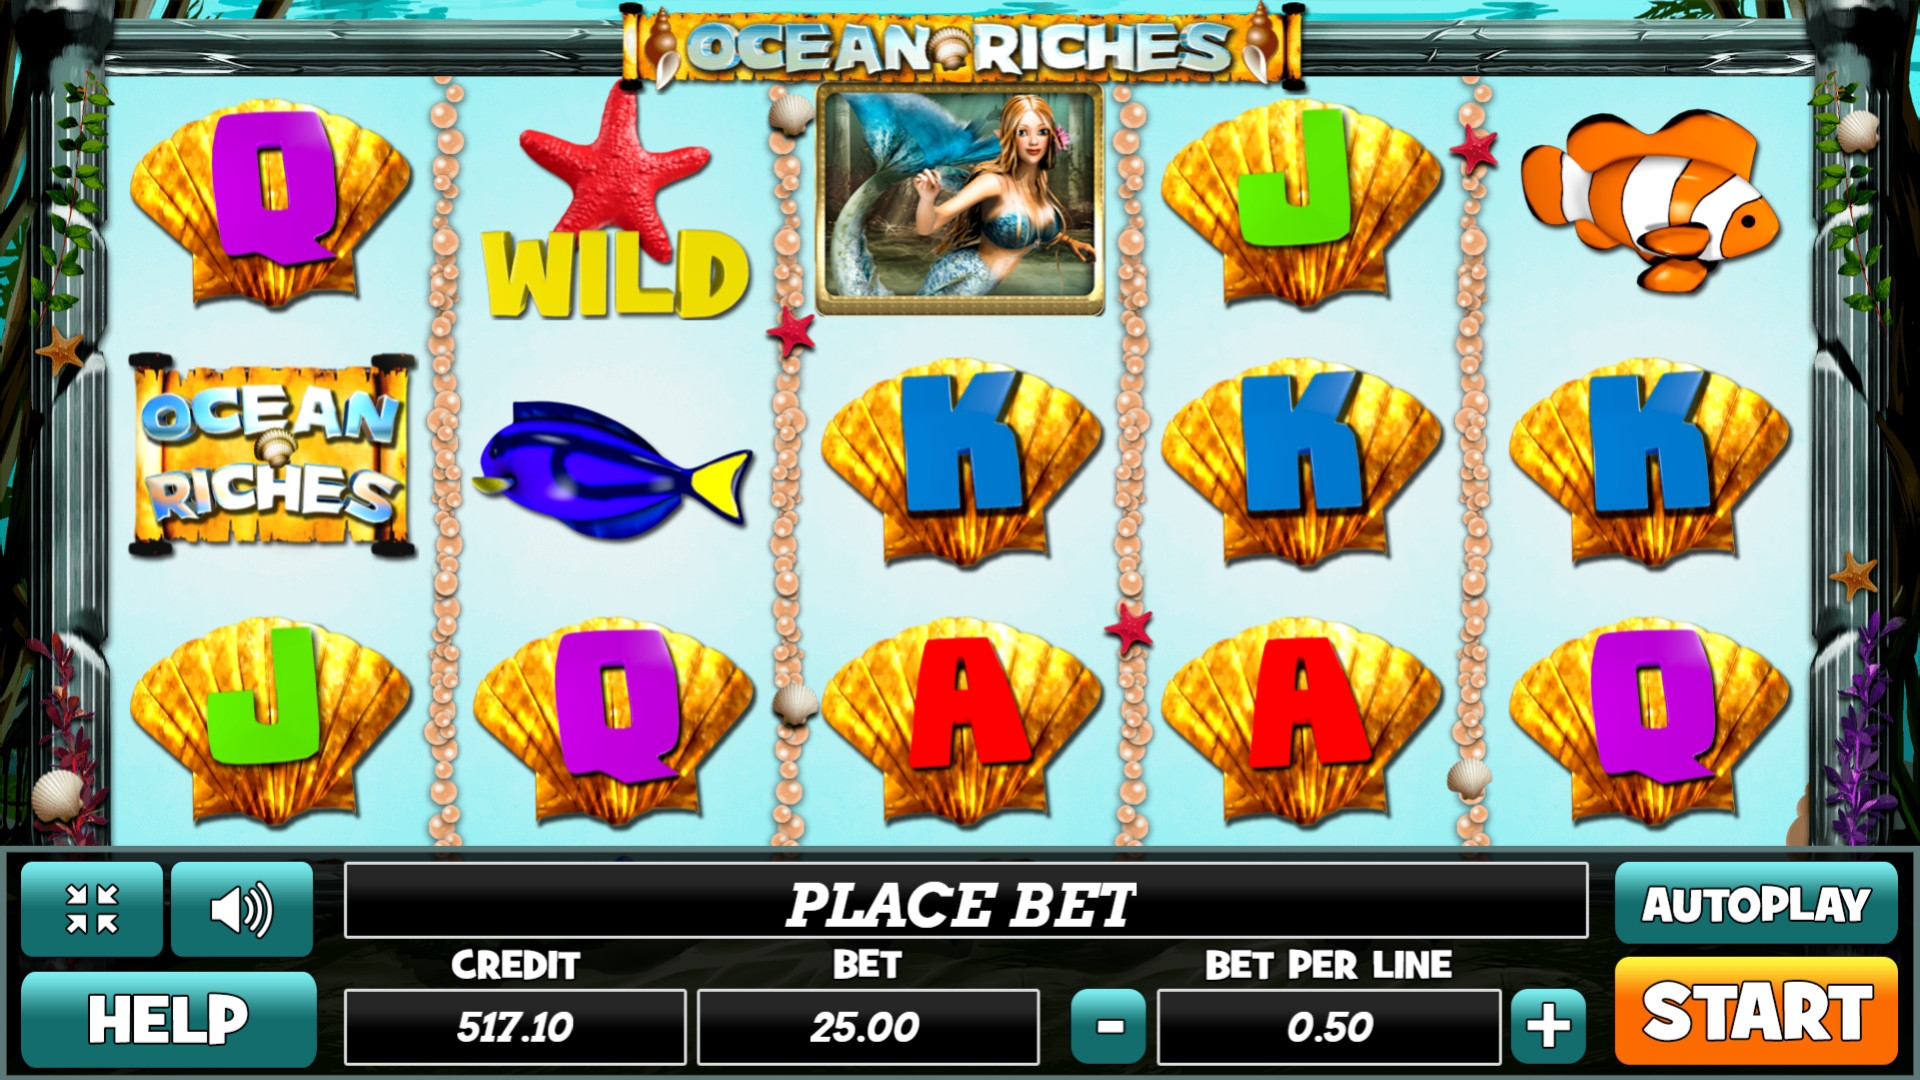 Ocean Riches (Ocean Riches) from category Slots